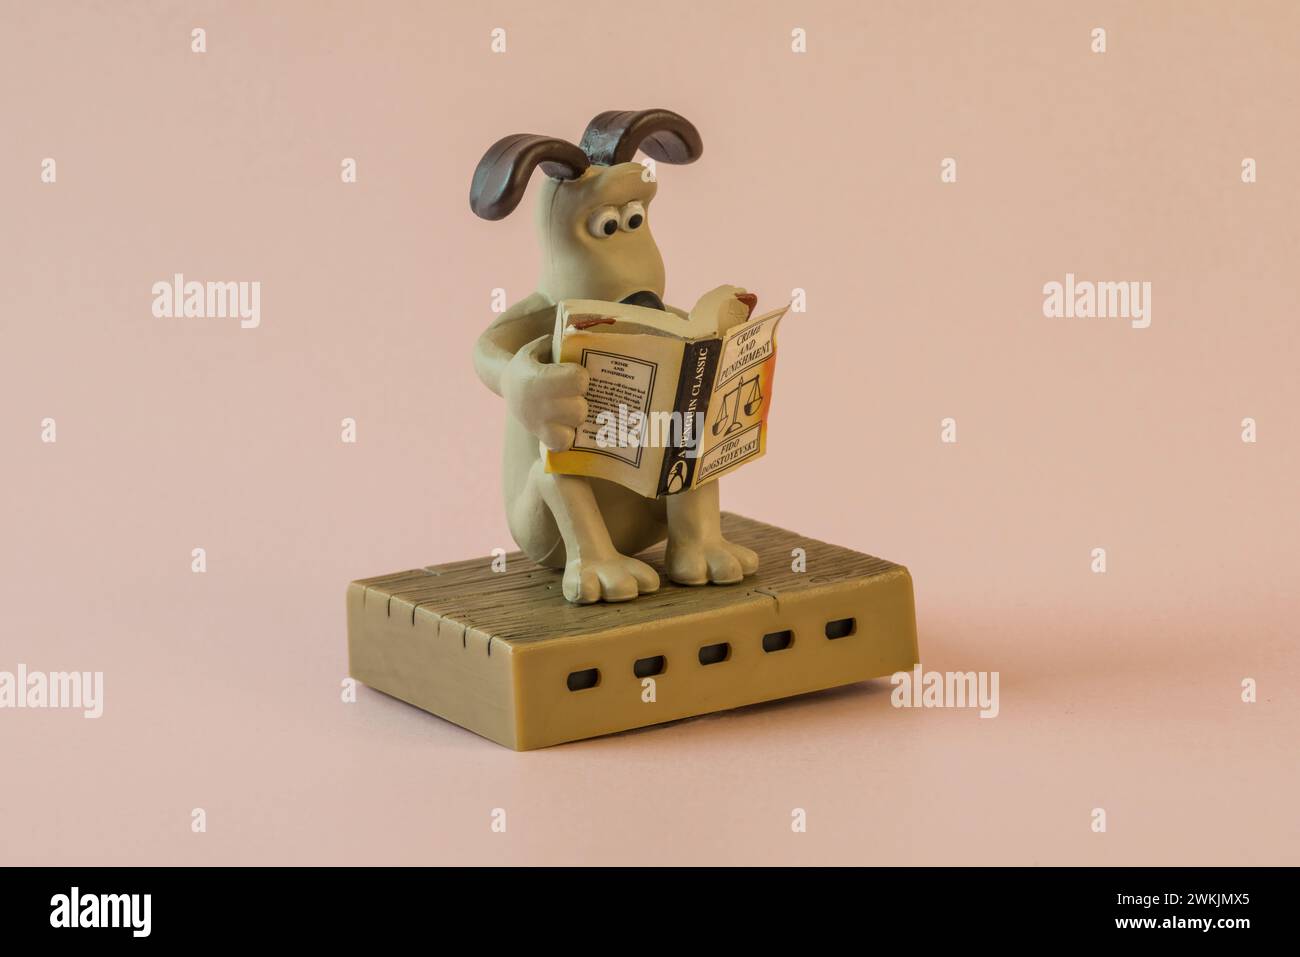 Novelty plastic air frshener from 1989: Aardman Animations character Grommit the dog reading Crime and Punishment book Stock Photo